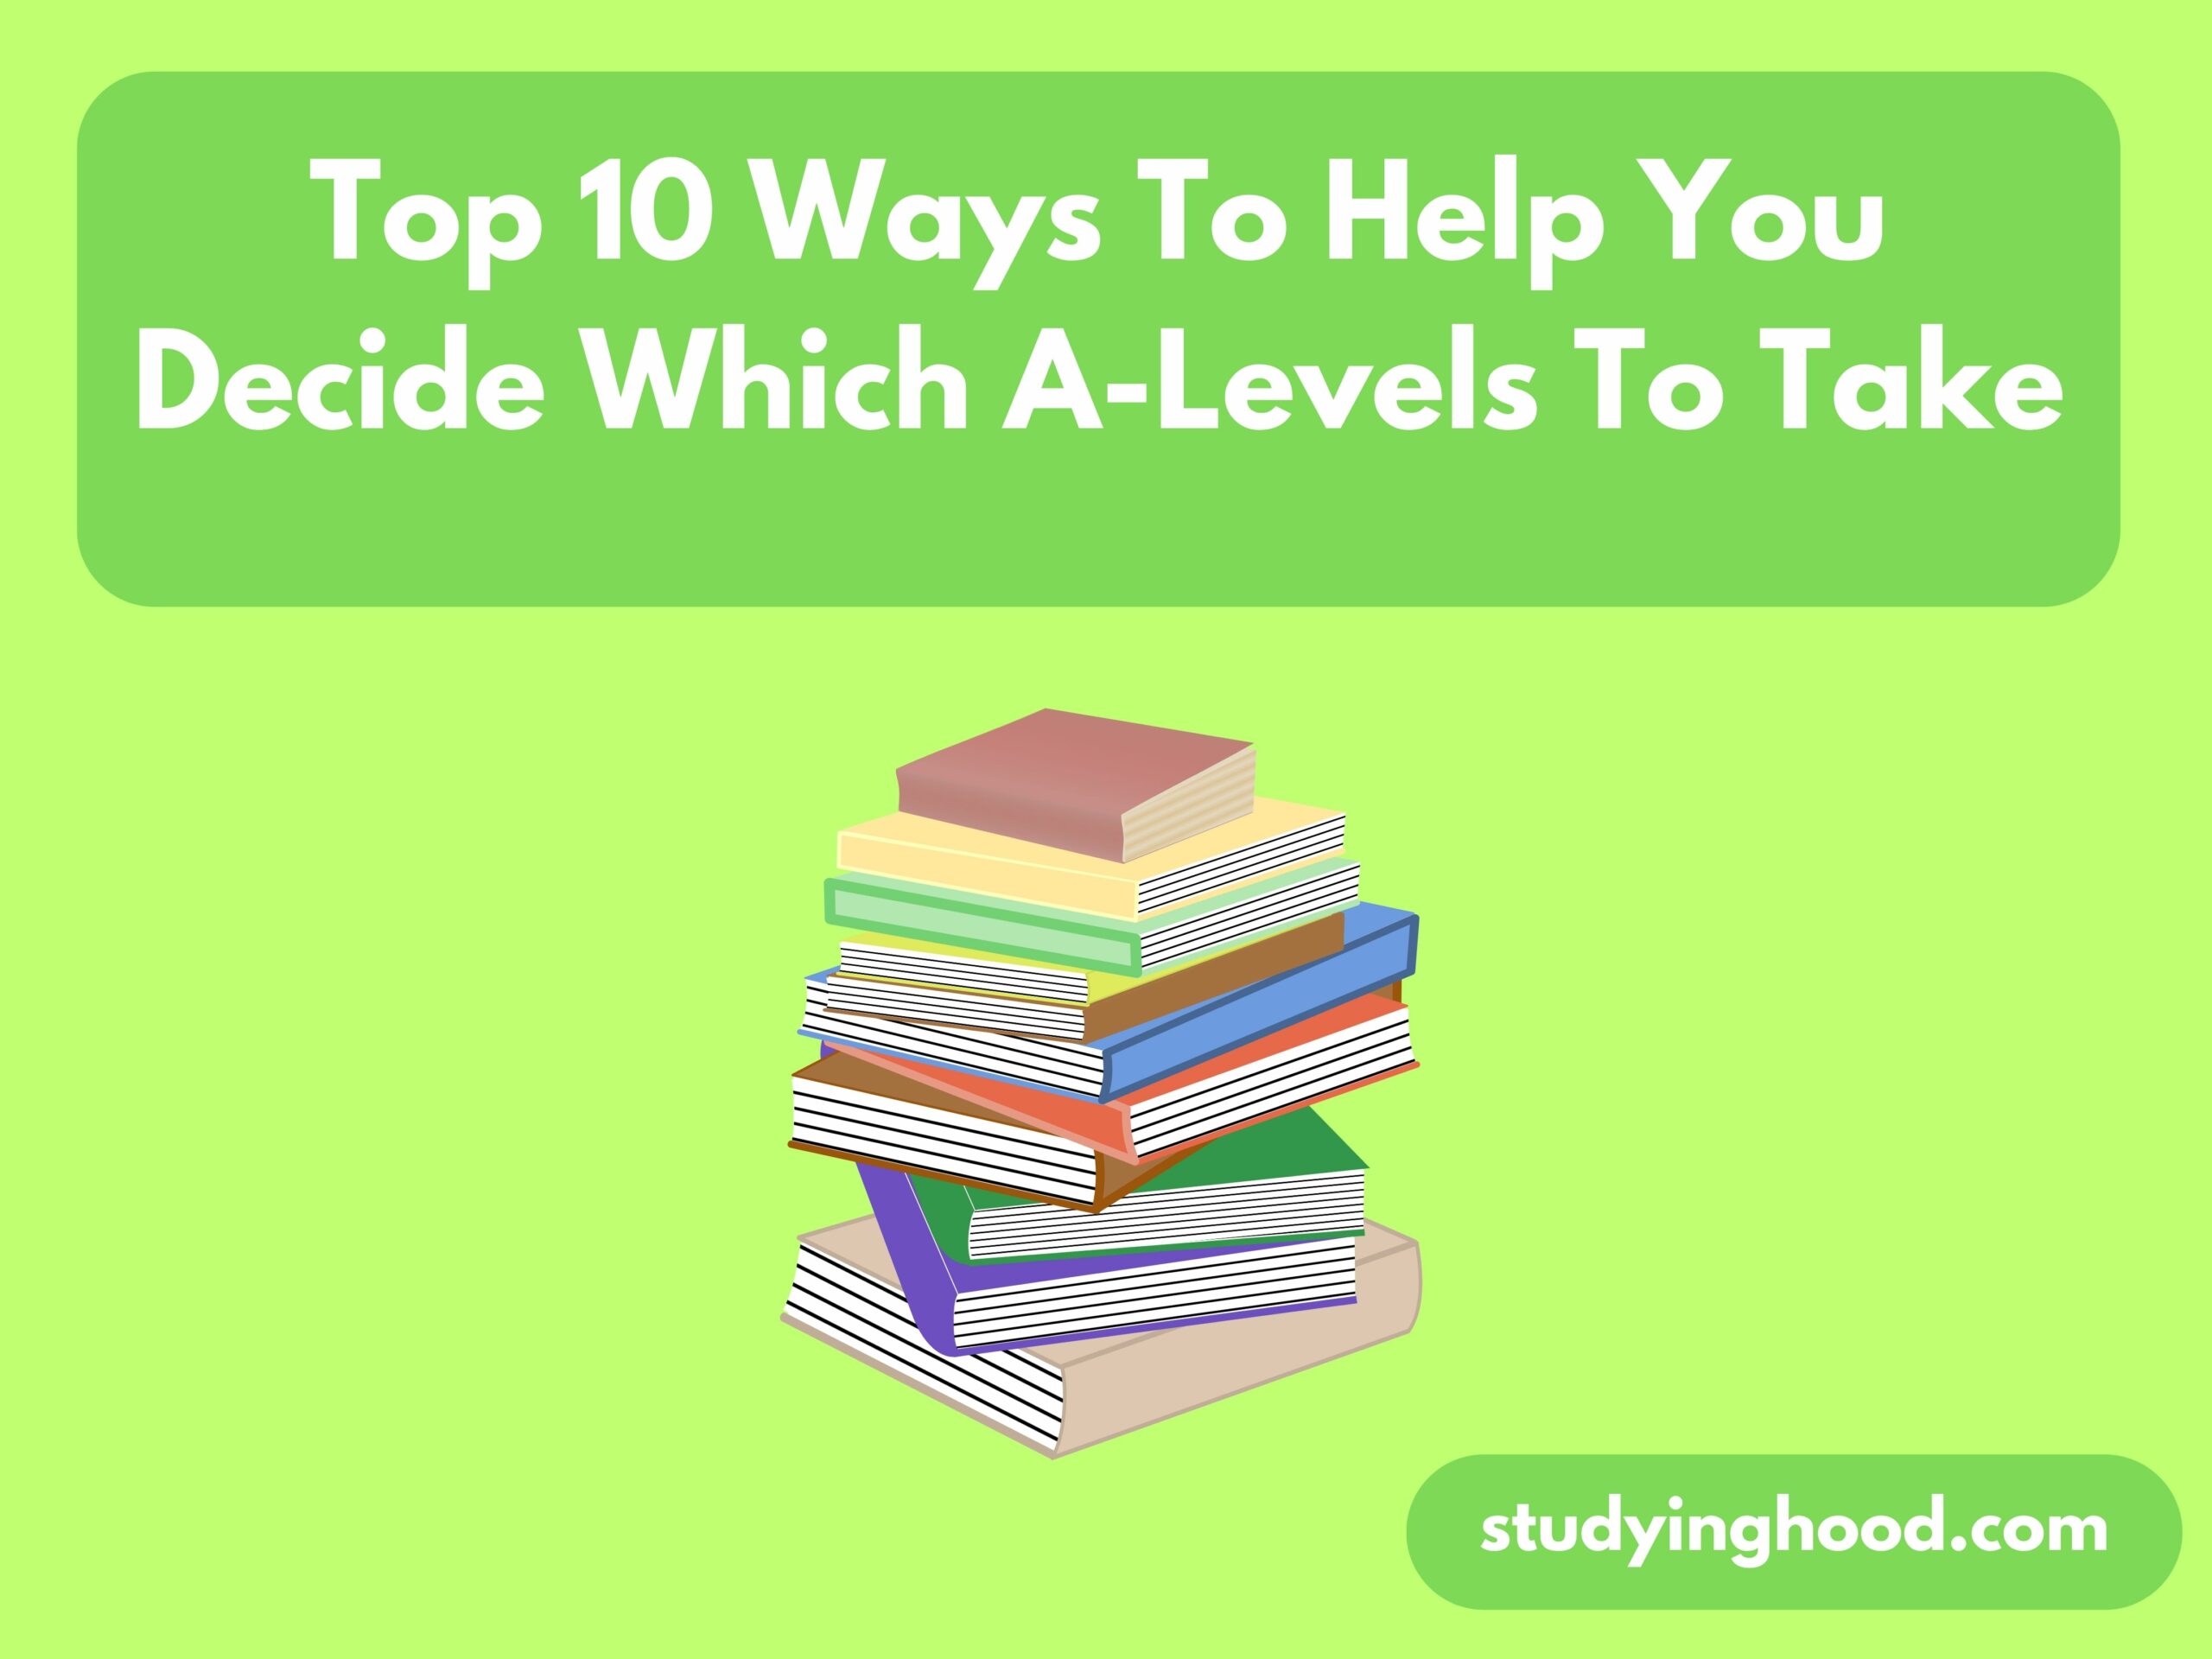 Top 10 Ways To Help You Decide Which A-Levels To Take